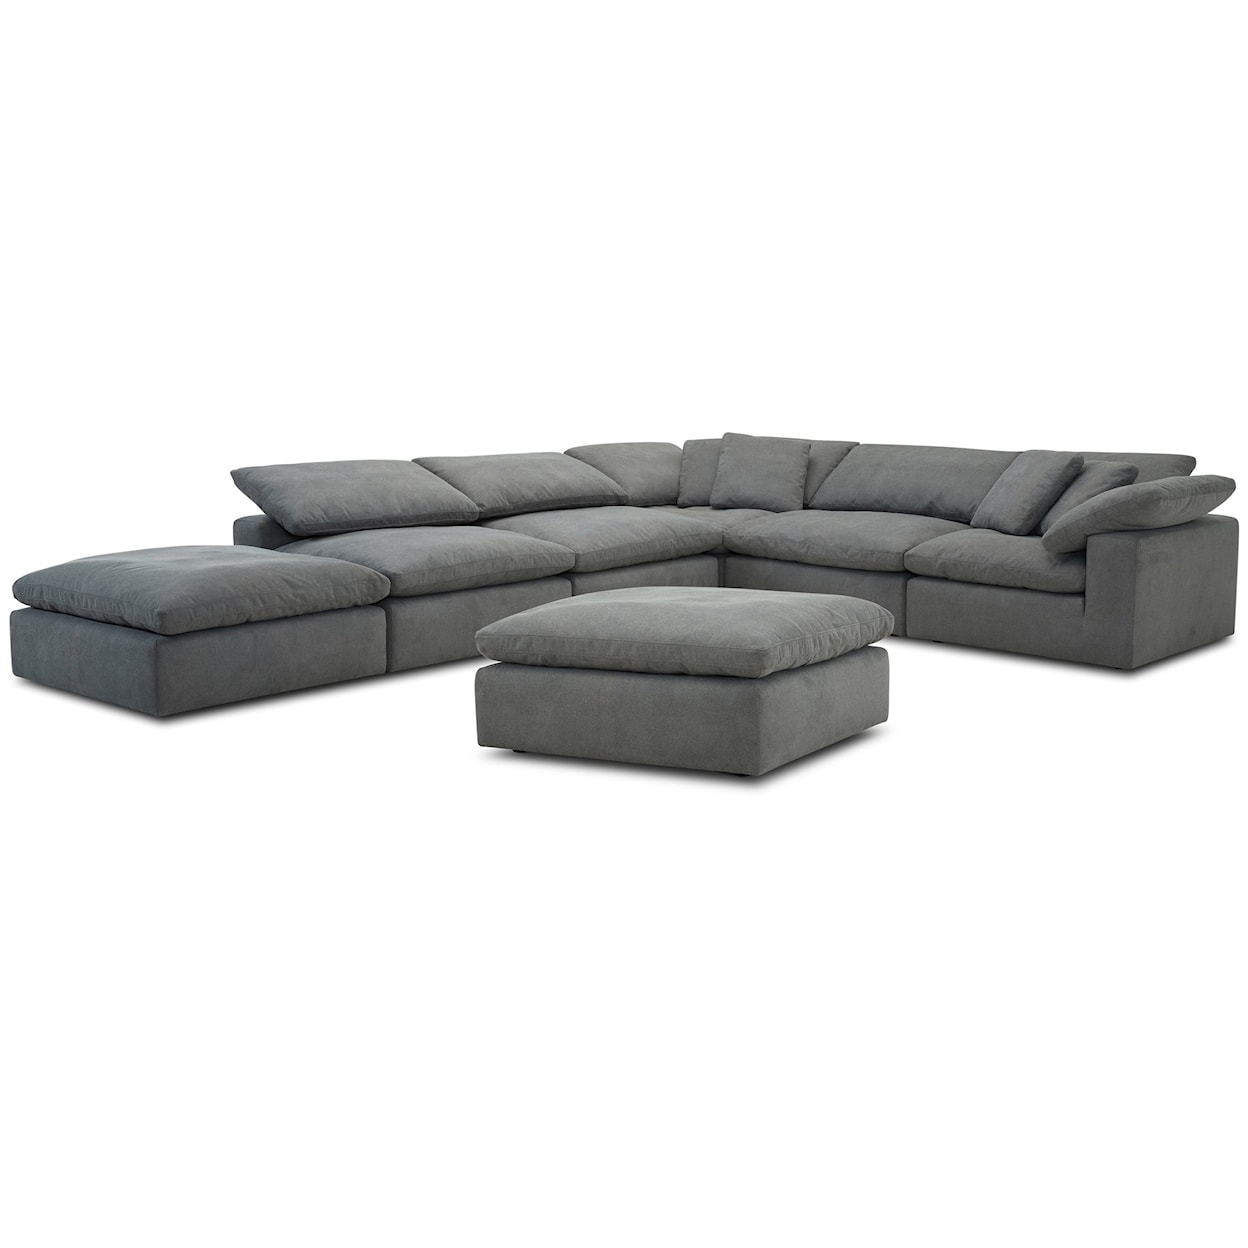 Parker Living Exhale - Mathis Thunder Sectional Sofa